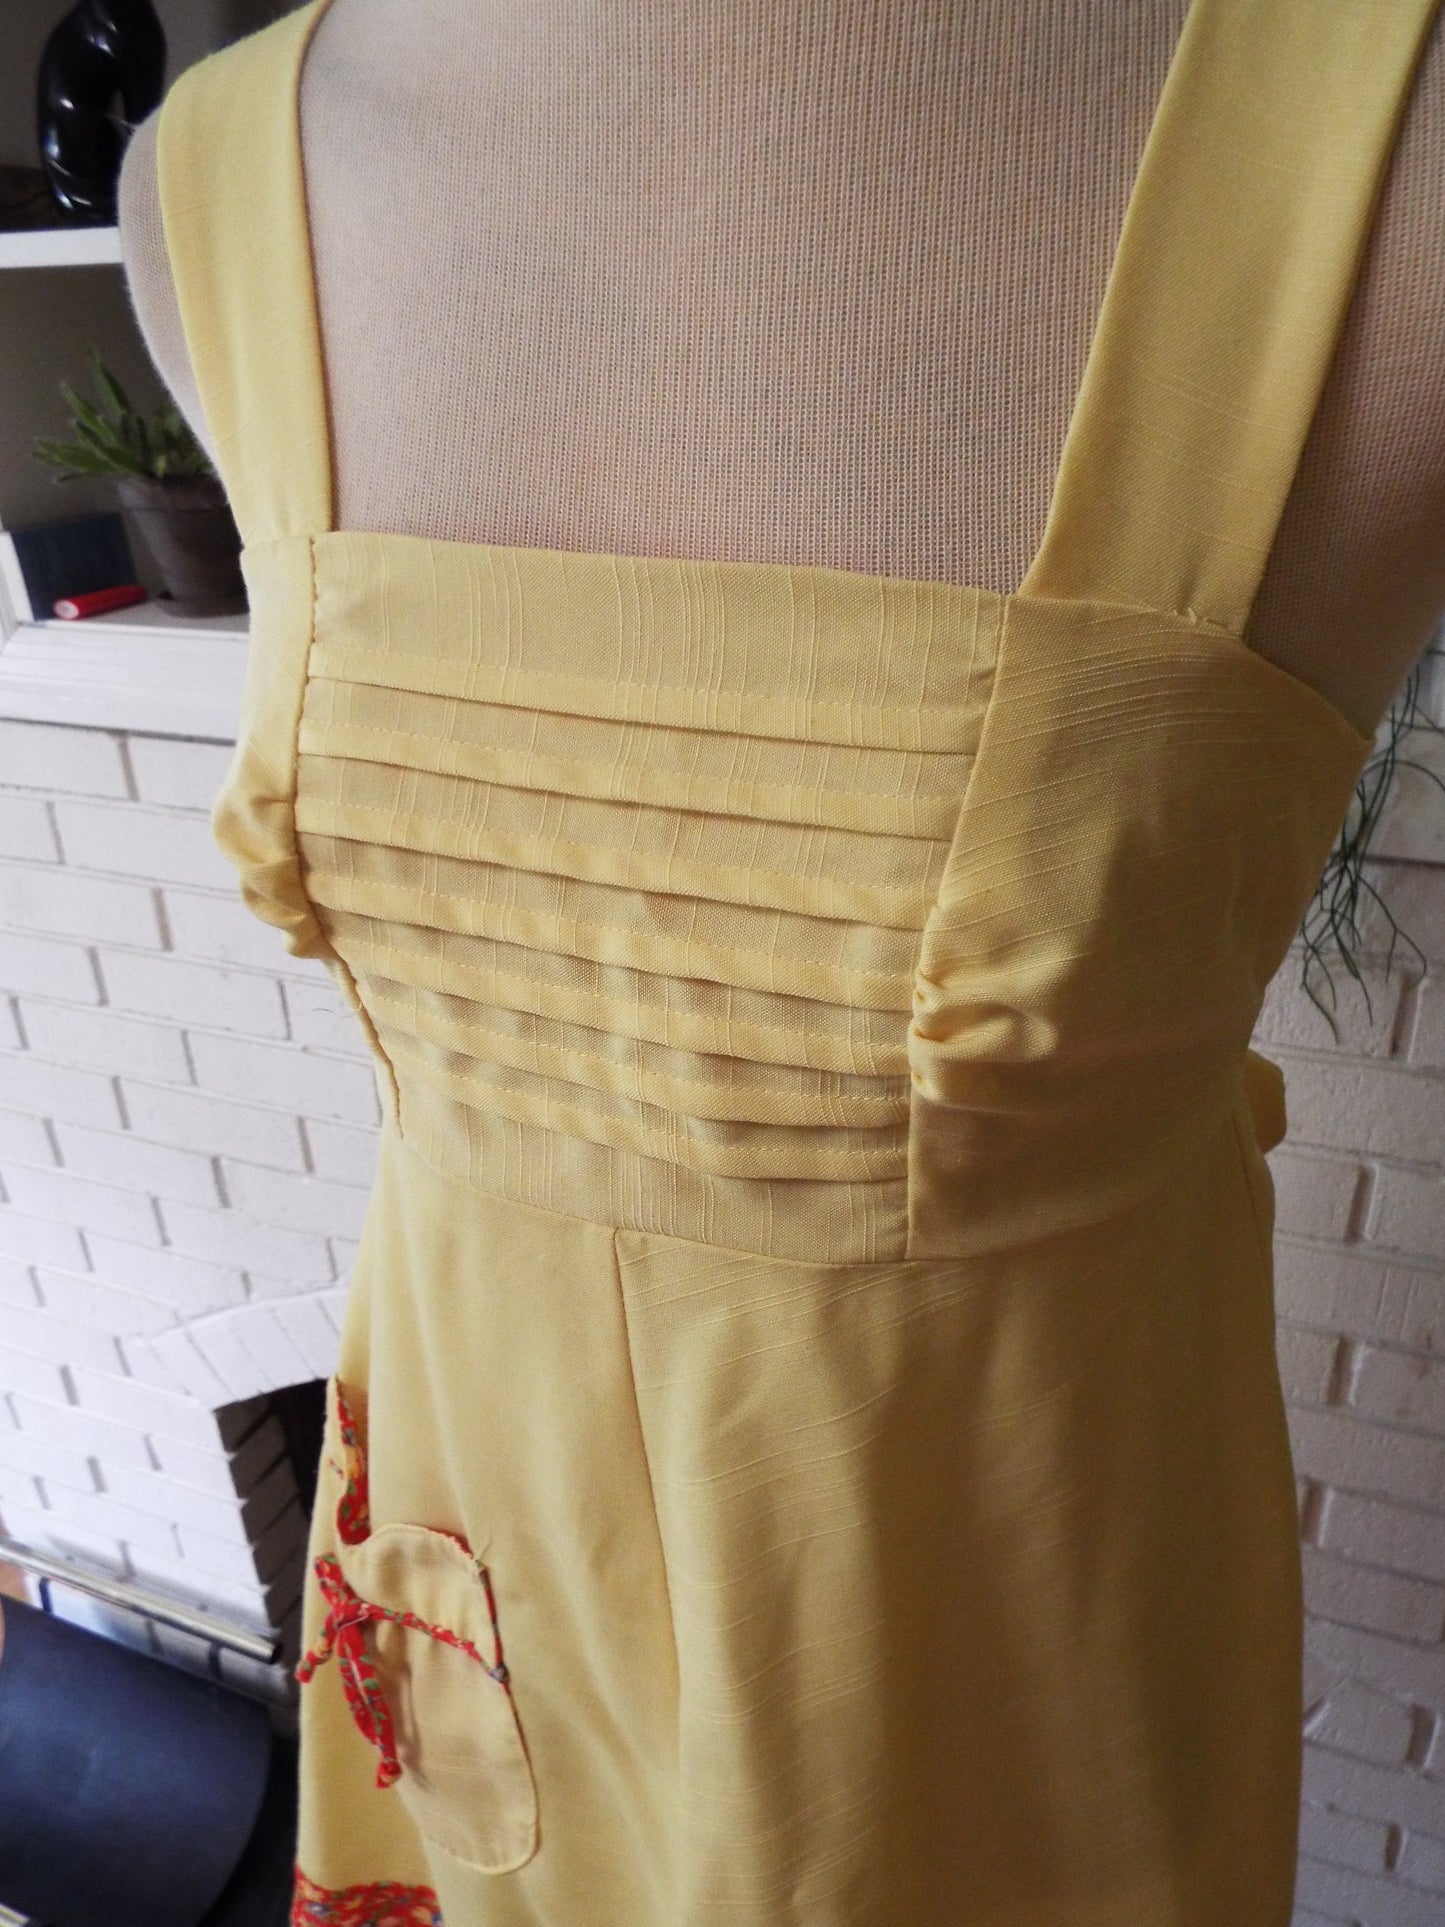 Vintage Sleeveless Yellow and Floral Dress